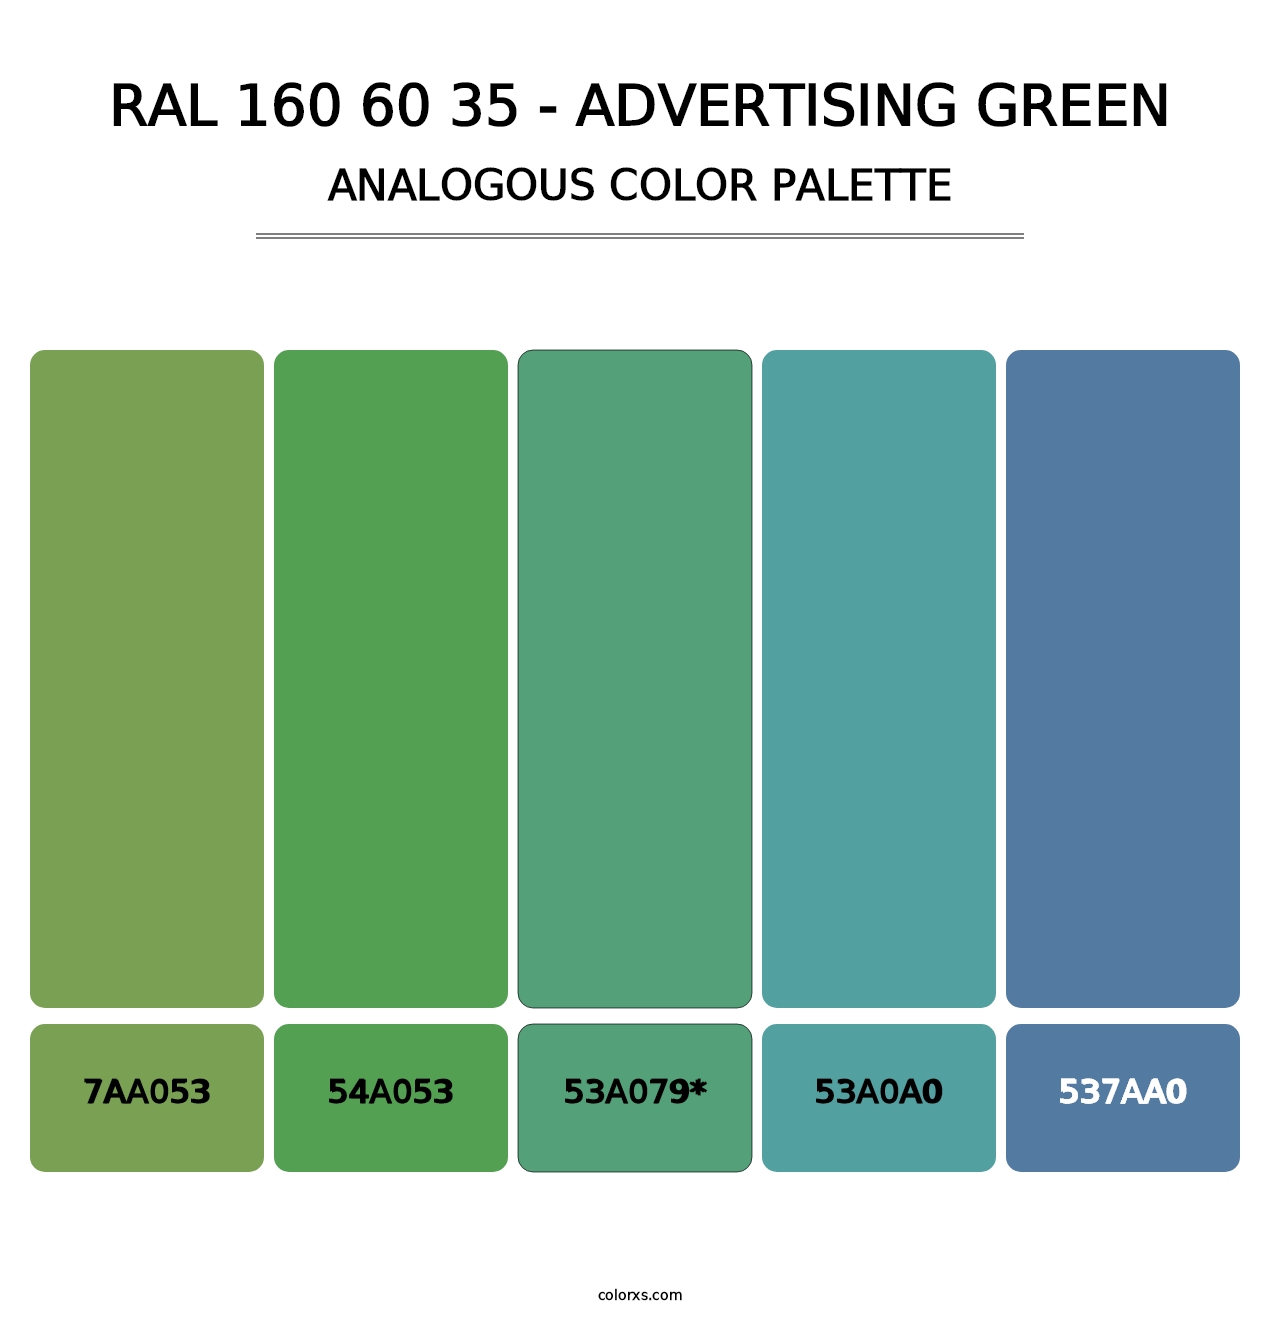 RAL 160 60 35 - Advertising Green - Analogous Color Palette